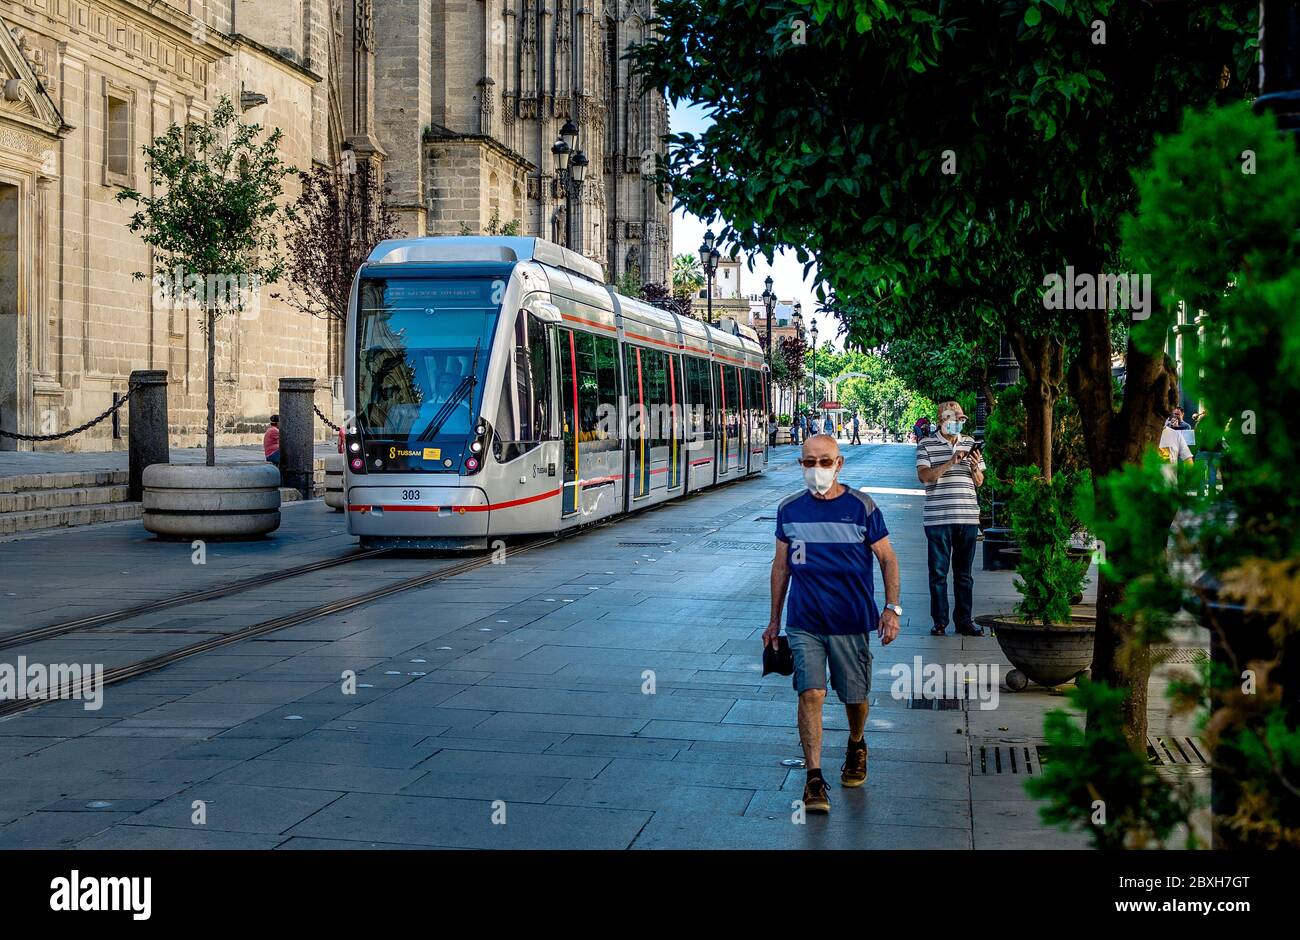 Seville, Spain; June 7, 2020: Selective focus on the tramway with blurry pedestrians. Stock Photo